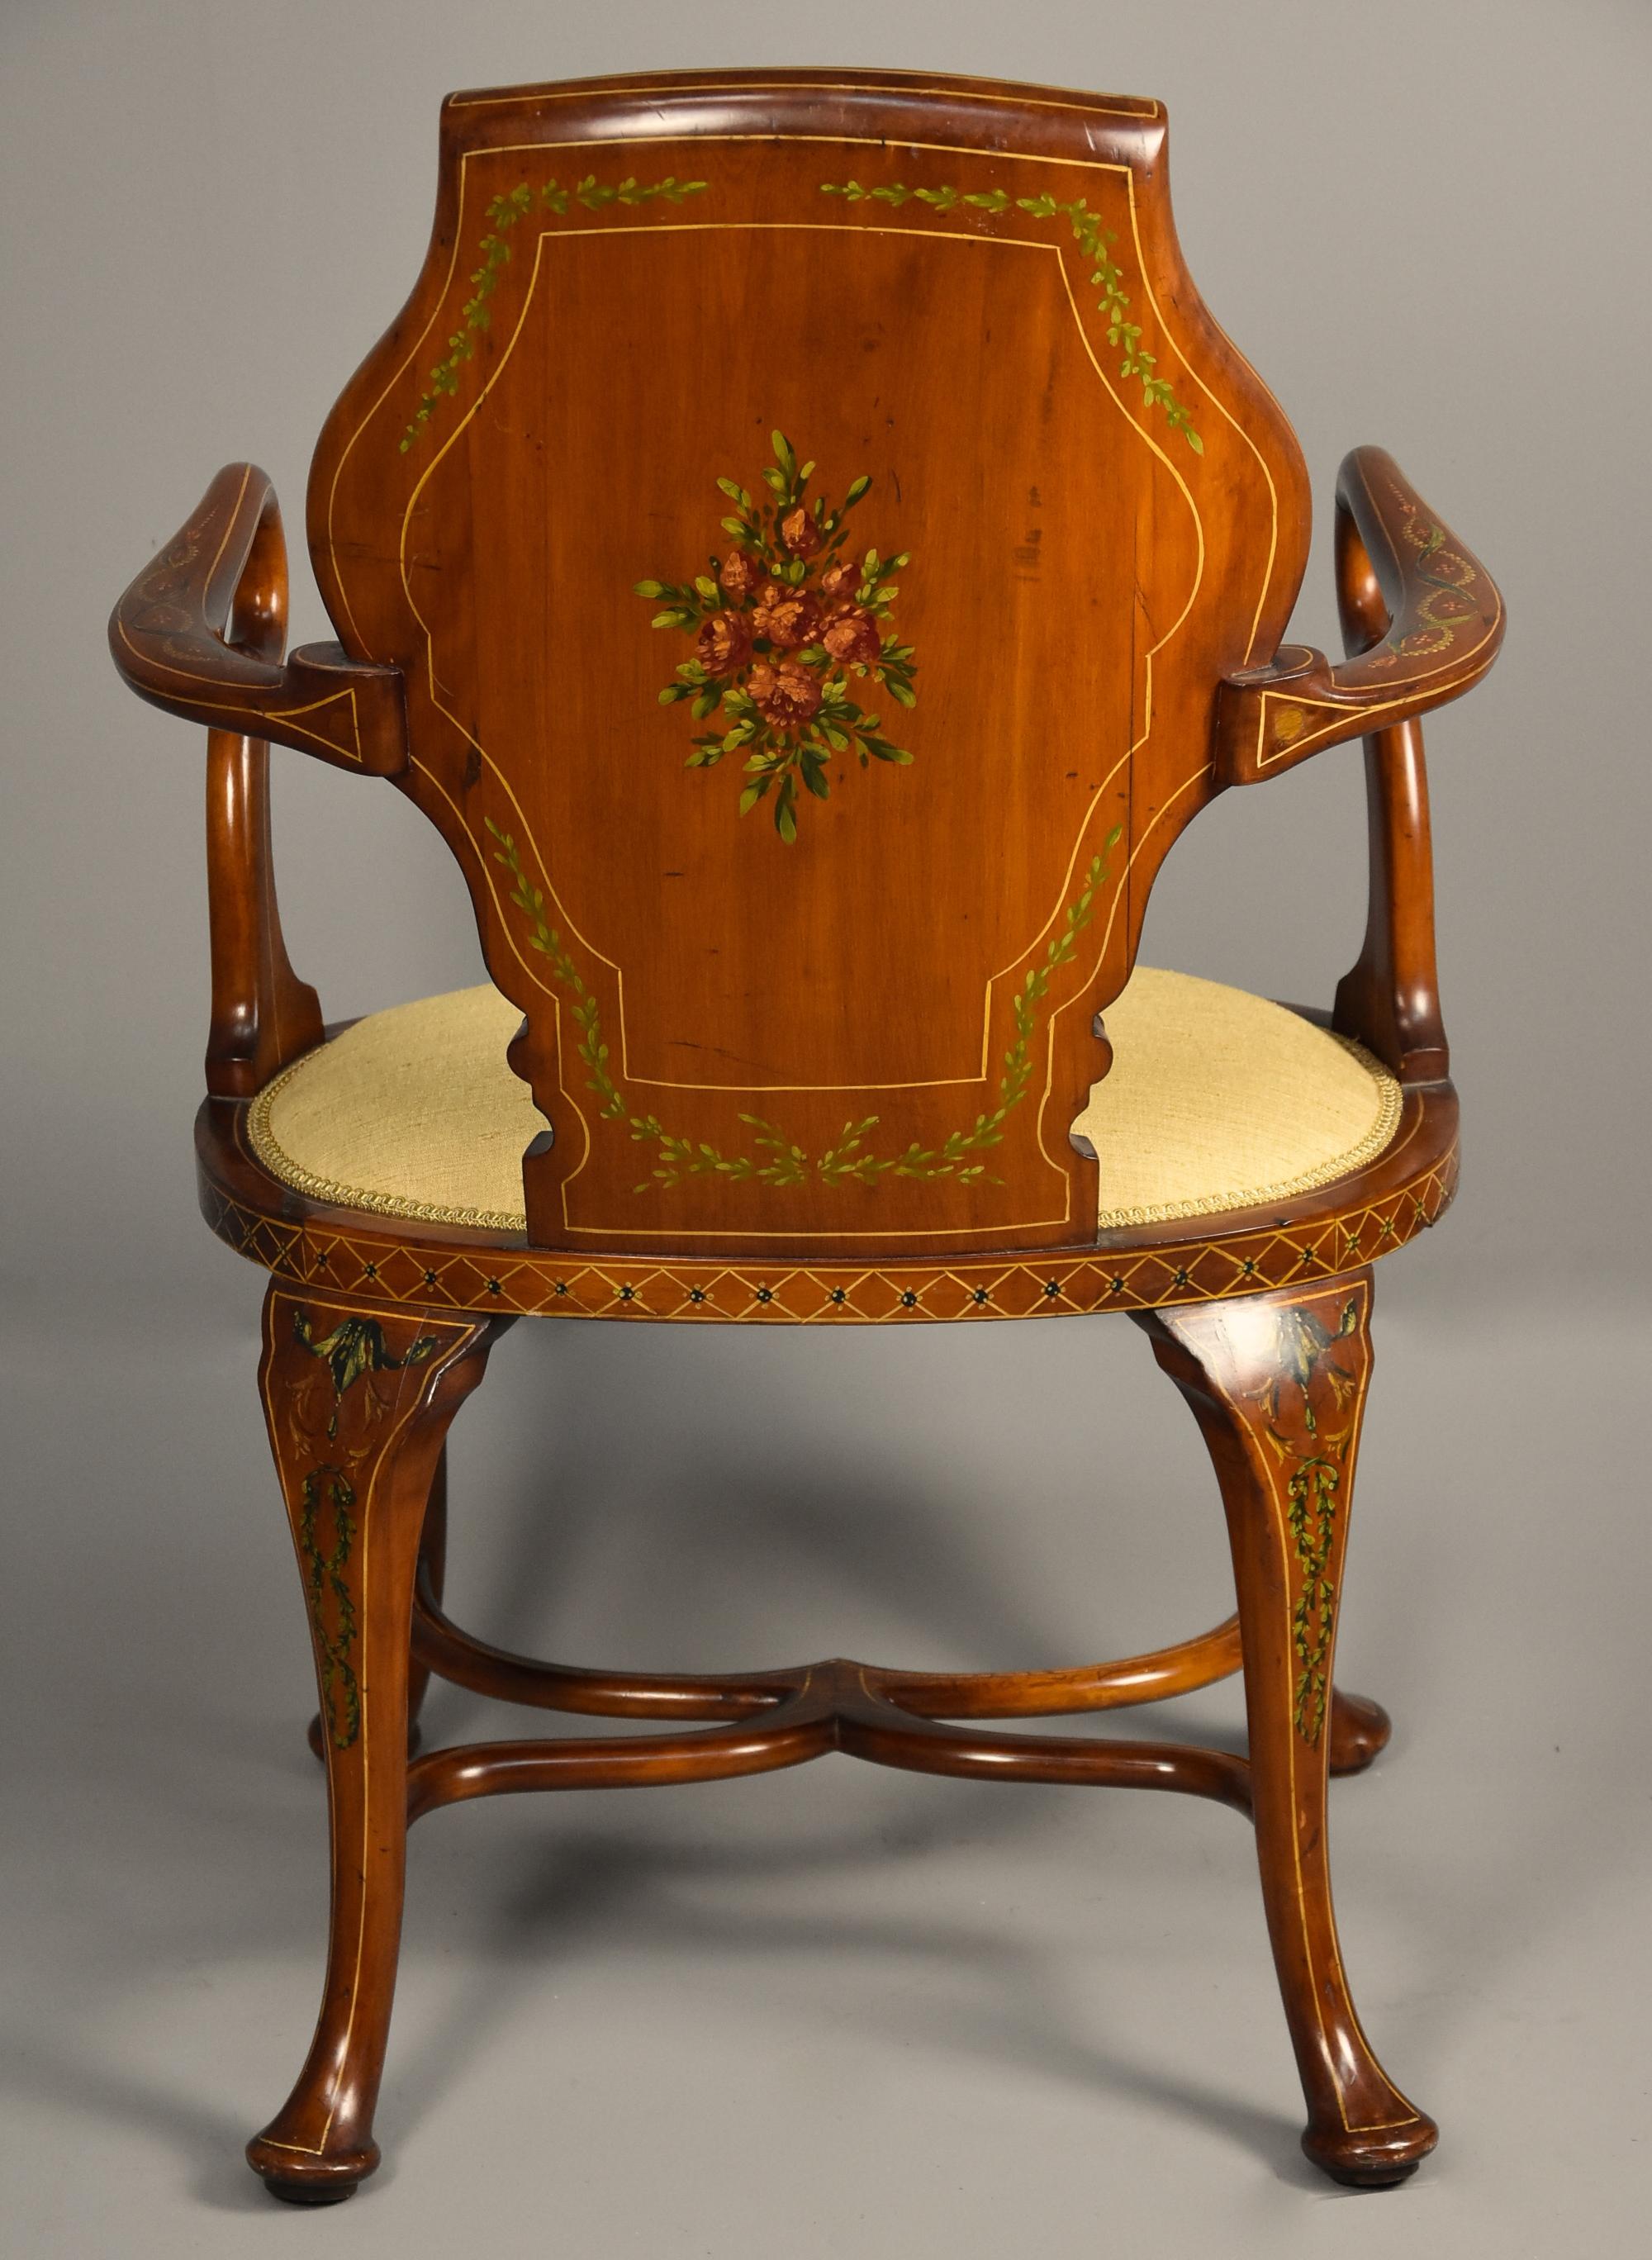 Highly Decorative Edwardian Satinwood and Painted Armchair in the Georgian Style im Angebot 5